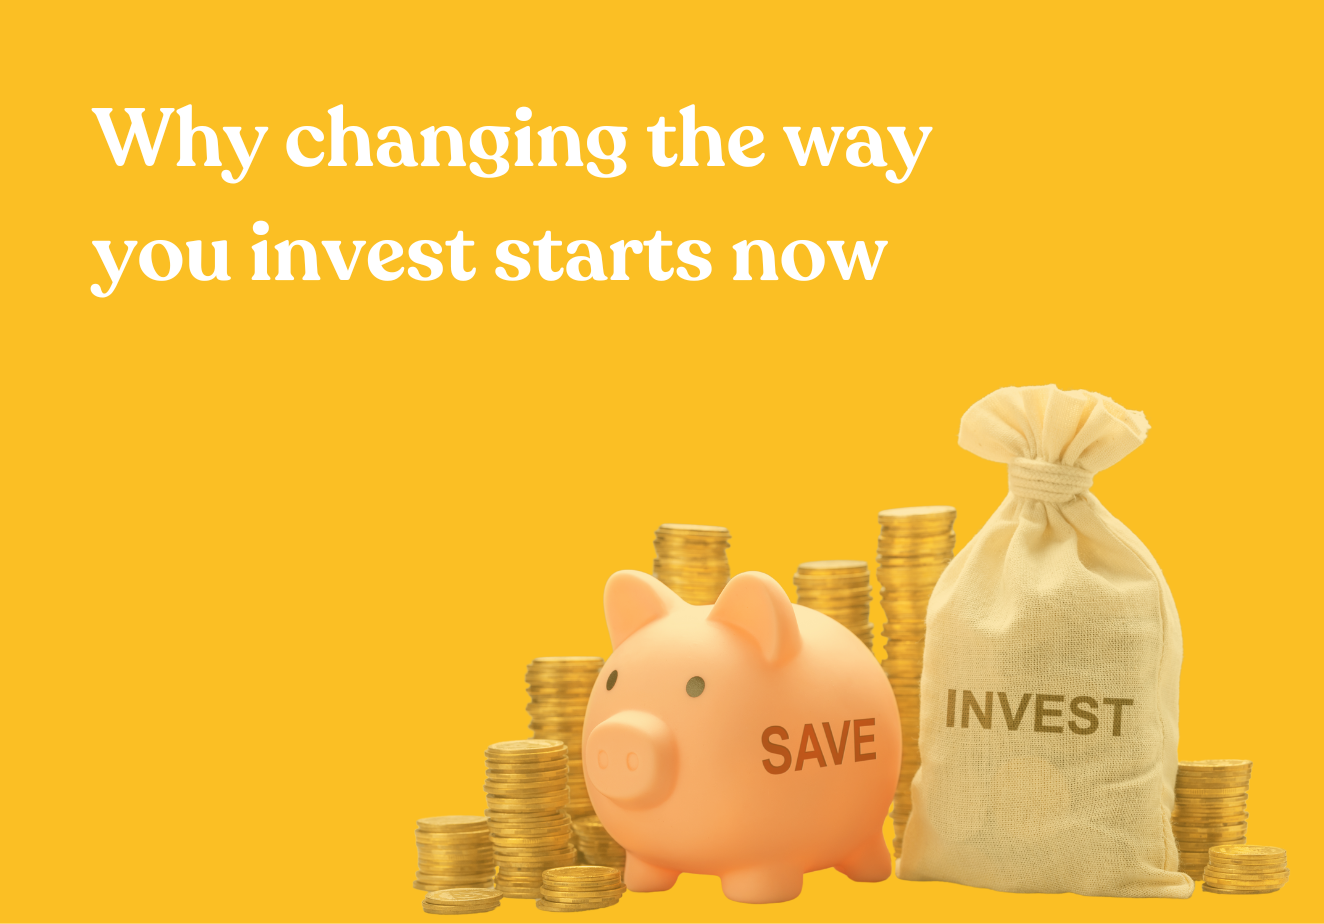 Why changing the way you invest starts now